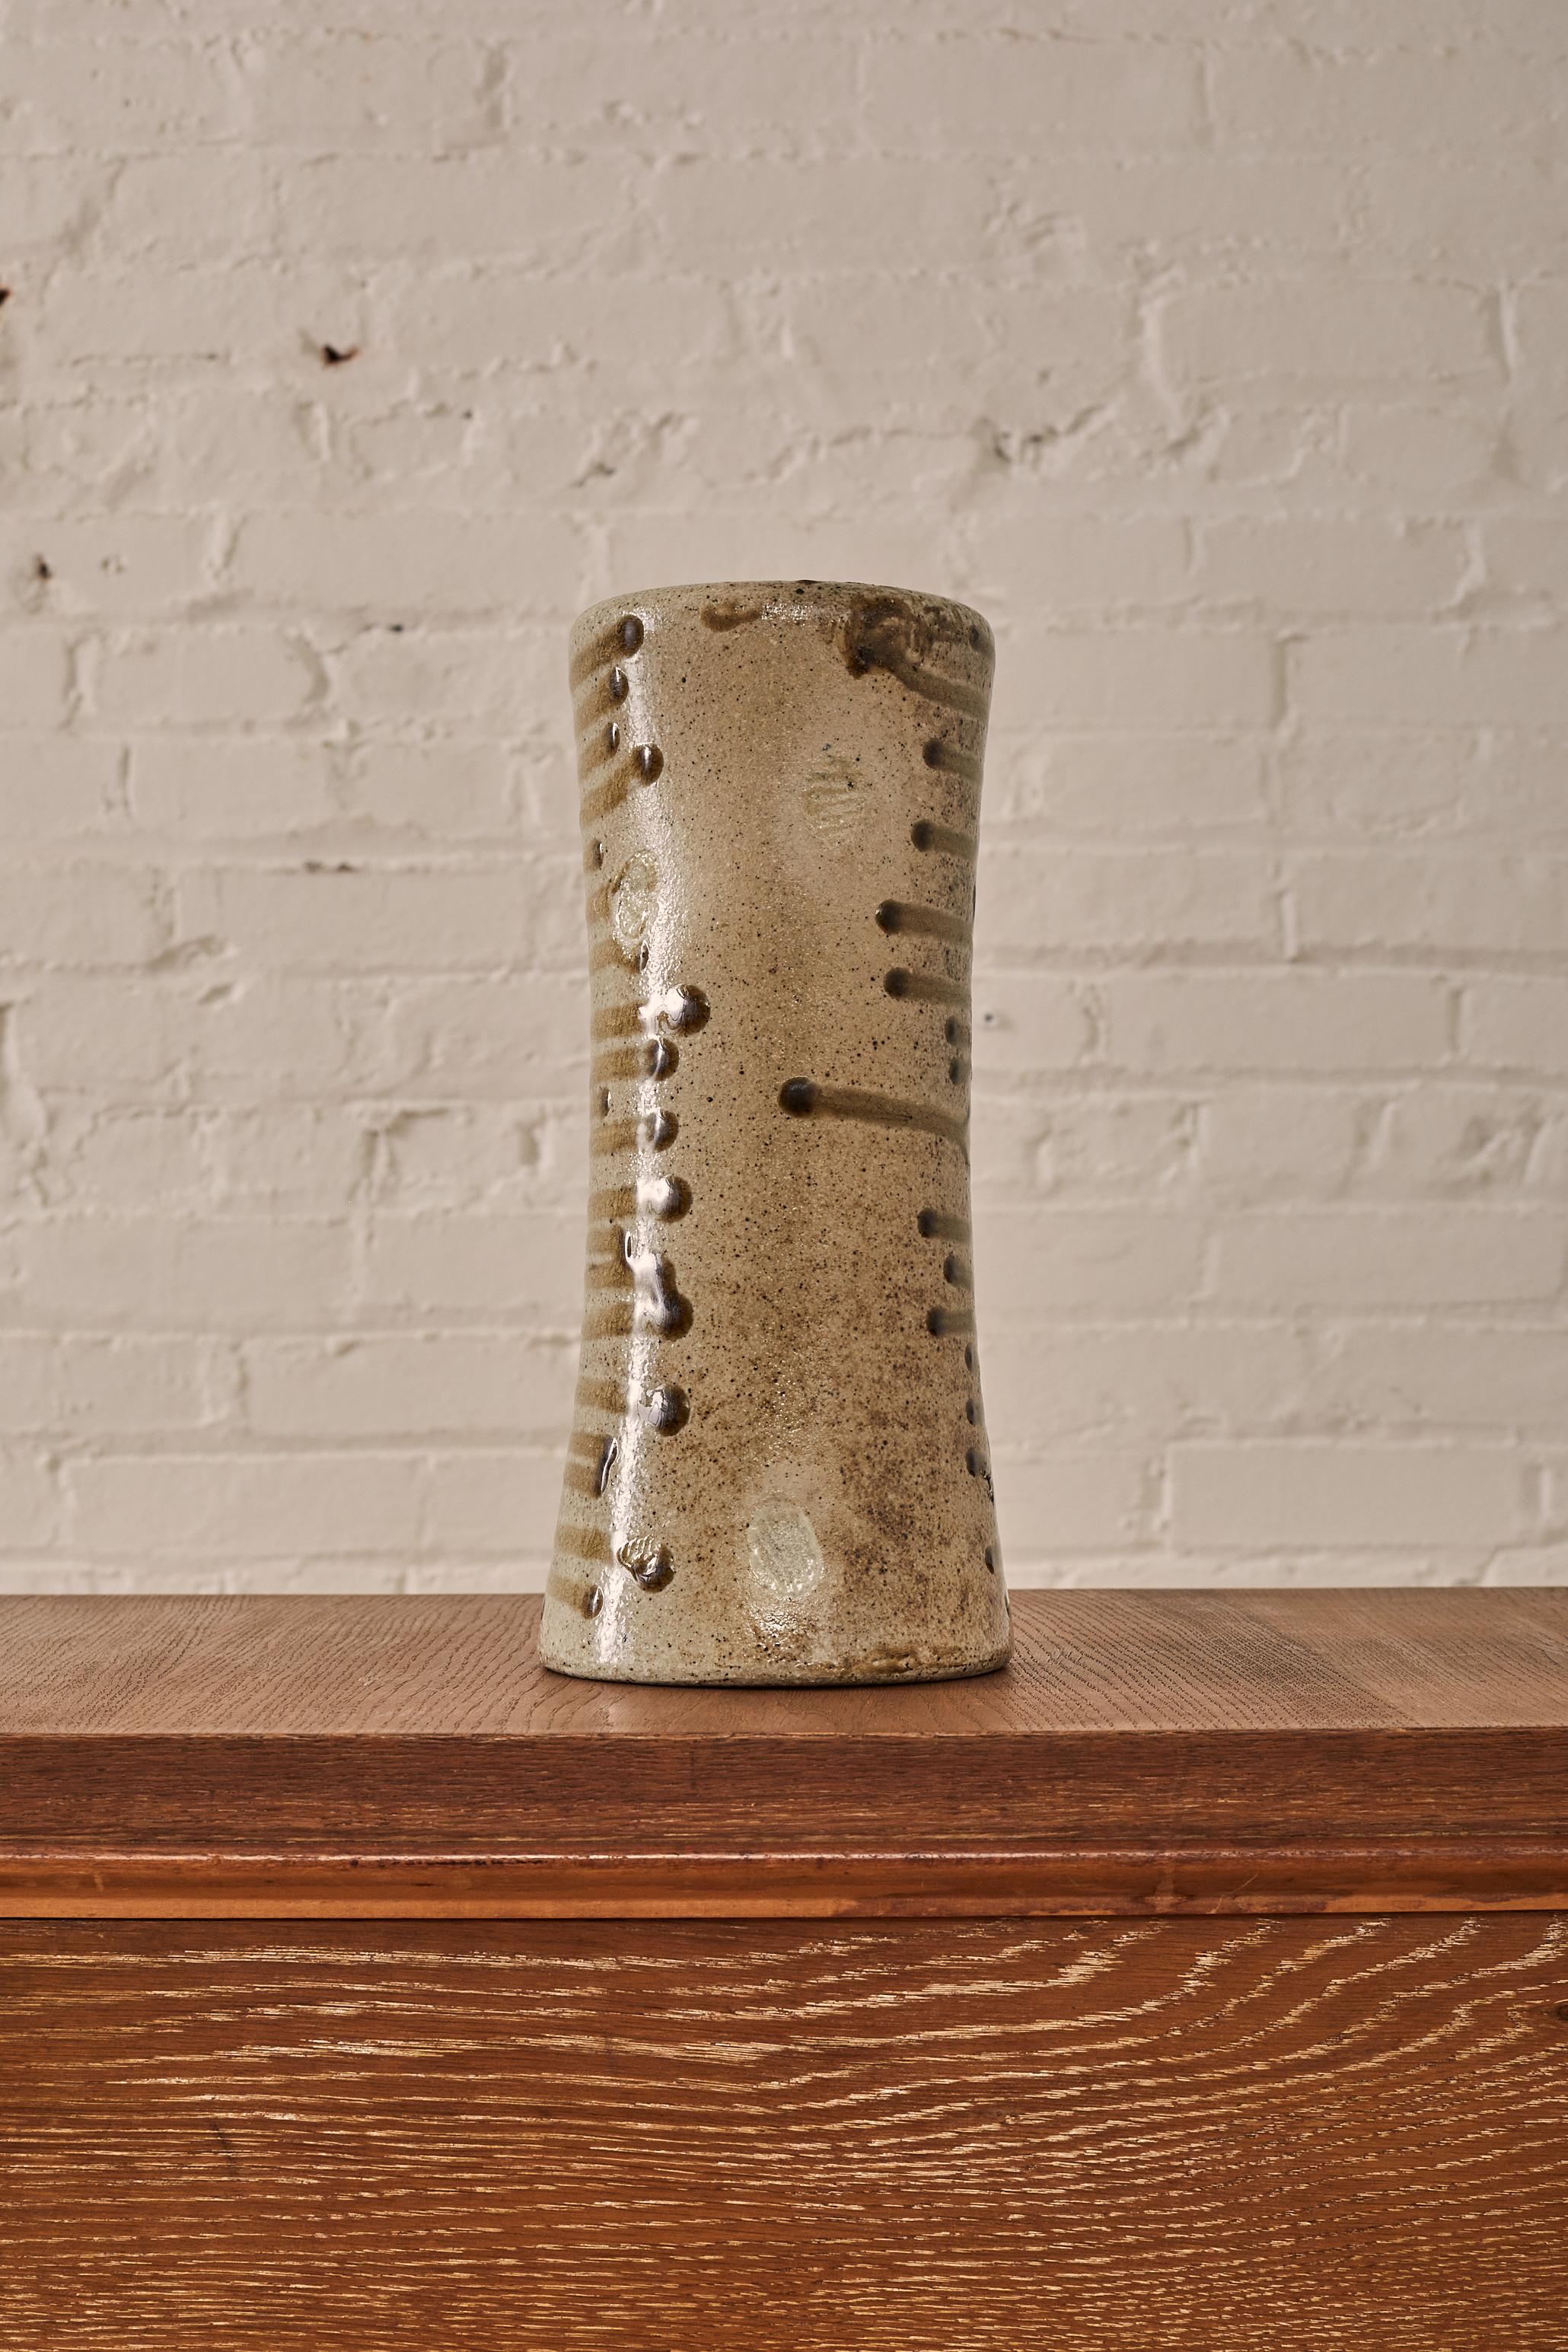 Glazed Ceramic Vase by David Stuempfle

Technical Details:

Dimensions: 12.25